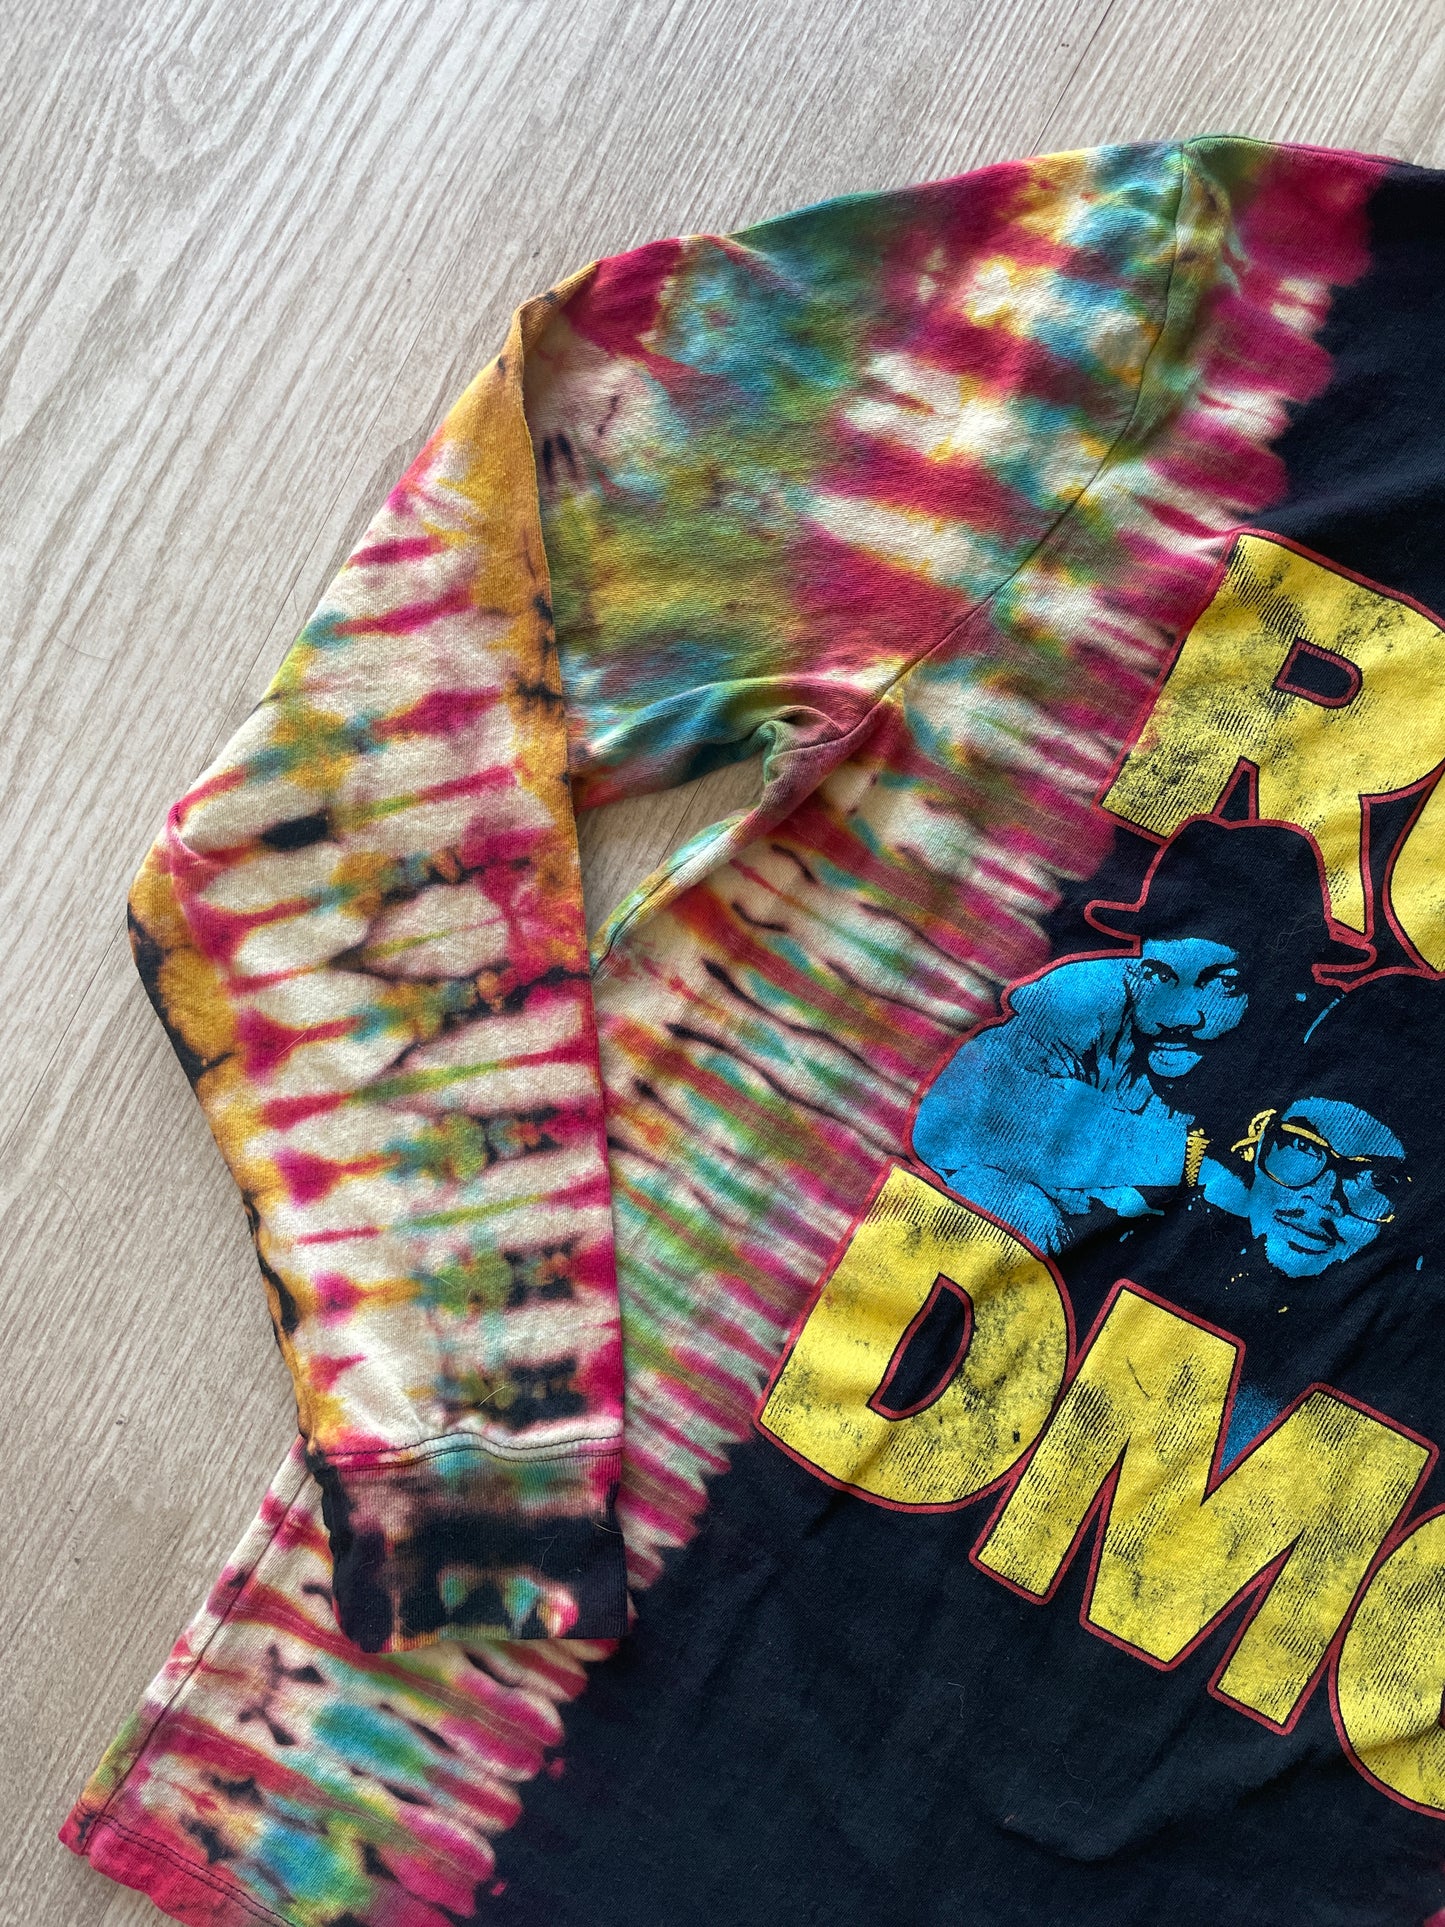 LARGE Men’s Run DMC Reverse Tie Dye Long Sleeve T-Shirt | One-Of-a-Kind Upcycled Black and Red Pleated Top